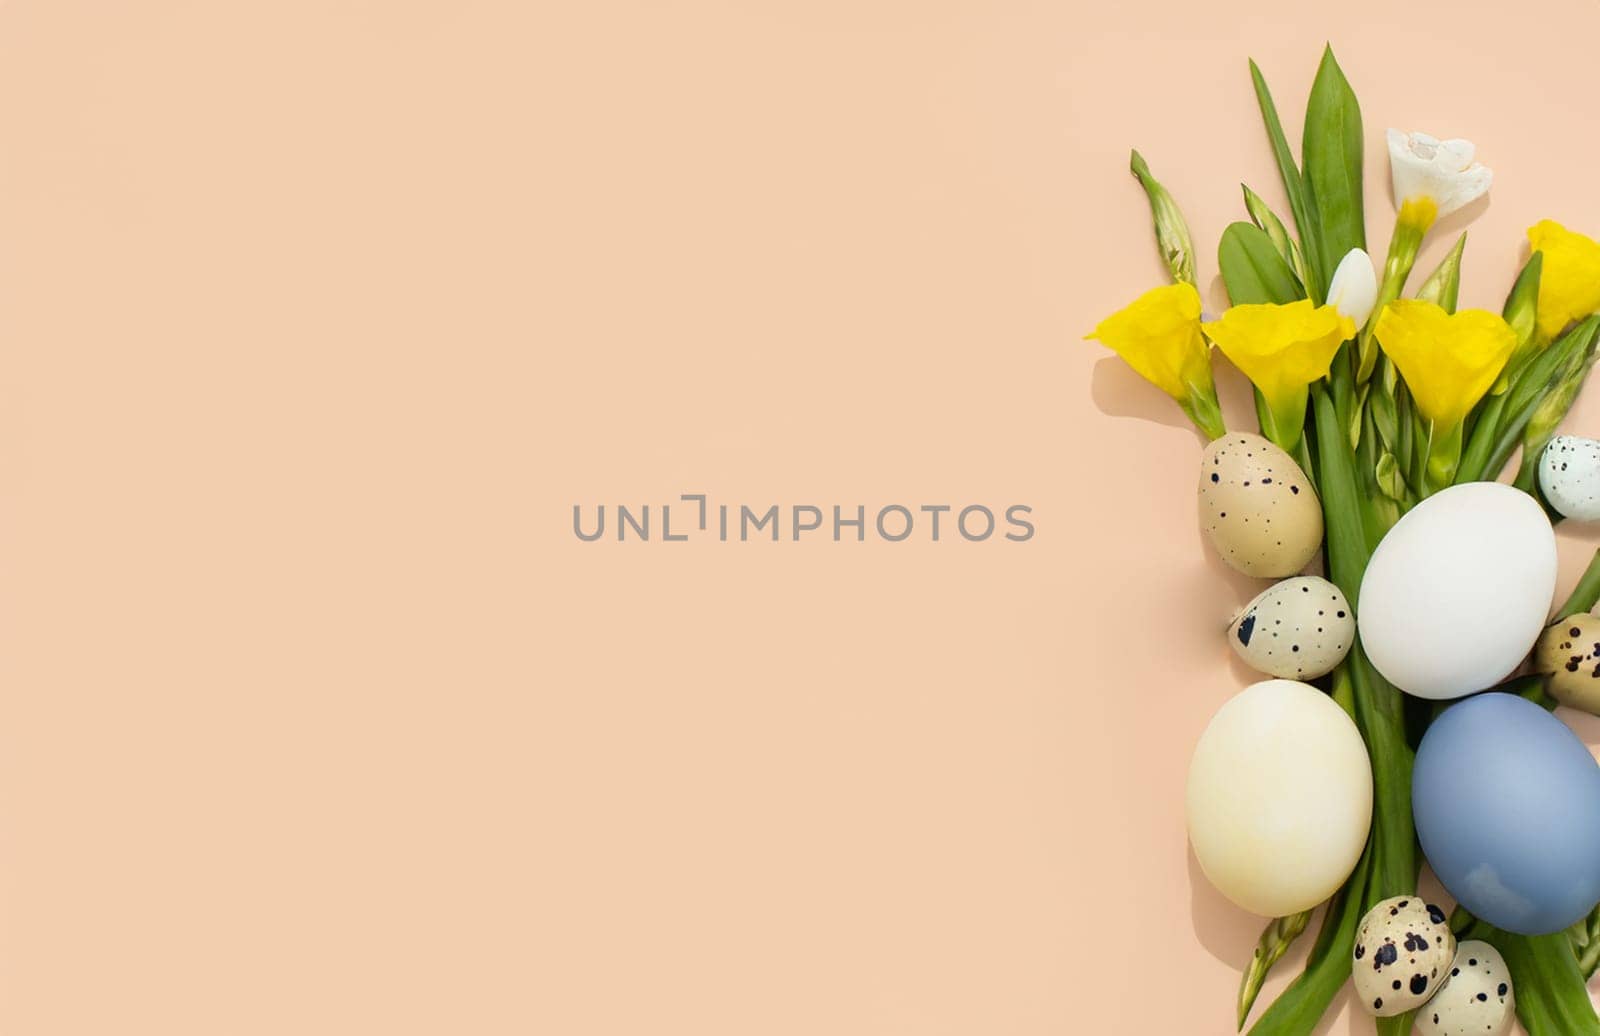 Trendy spring easter eggs compositon with painted egges and flowers and copy space for text